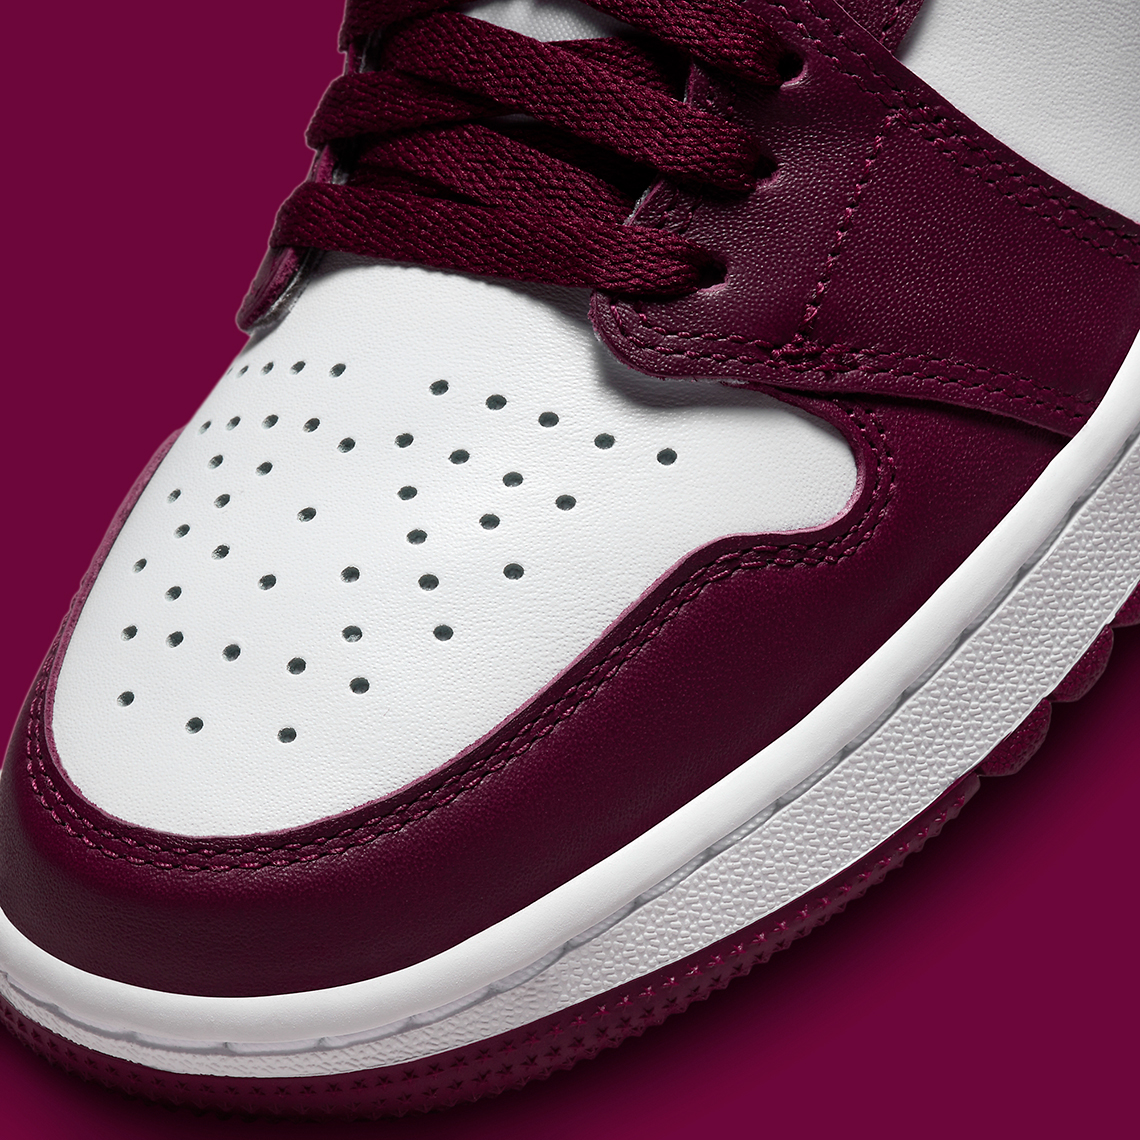 Jordan Brand is using Russell Westbrooks unique style as inspired to this Retro PS 'Infrared' Bordeaux Dq0660 103 7